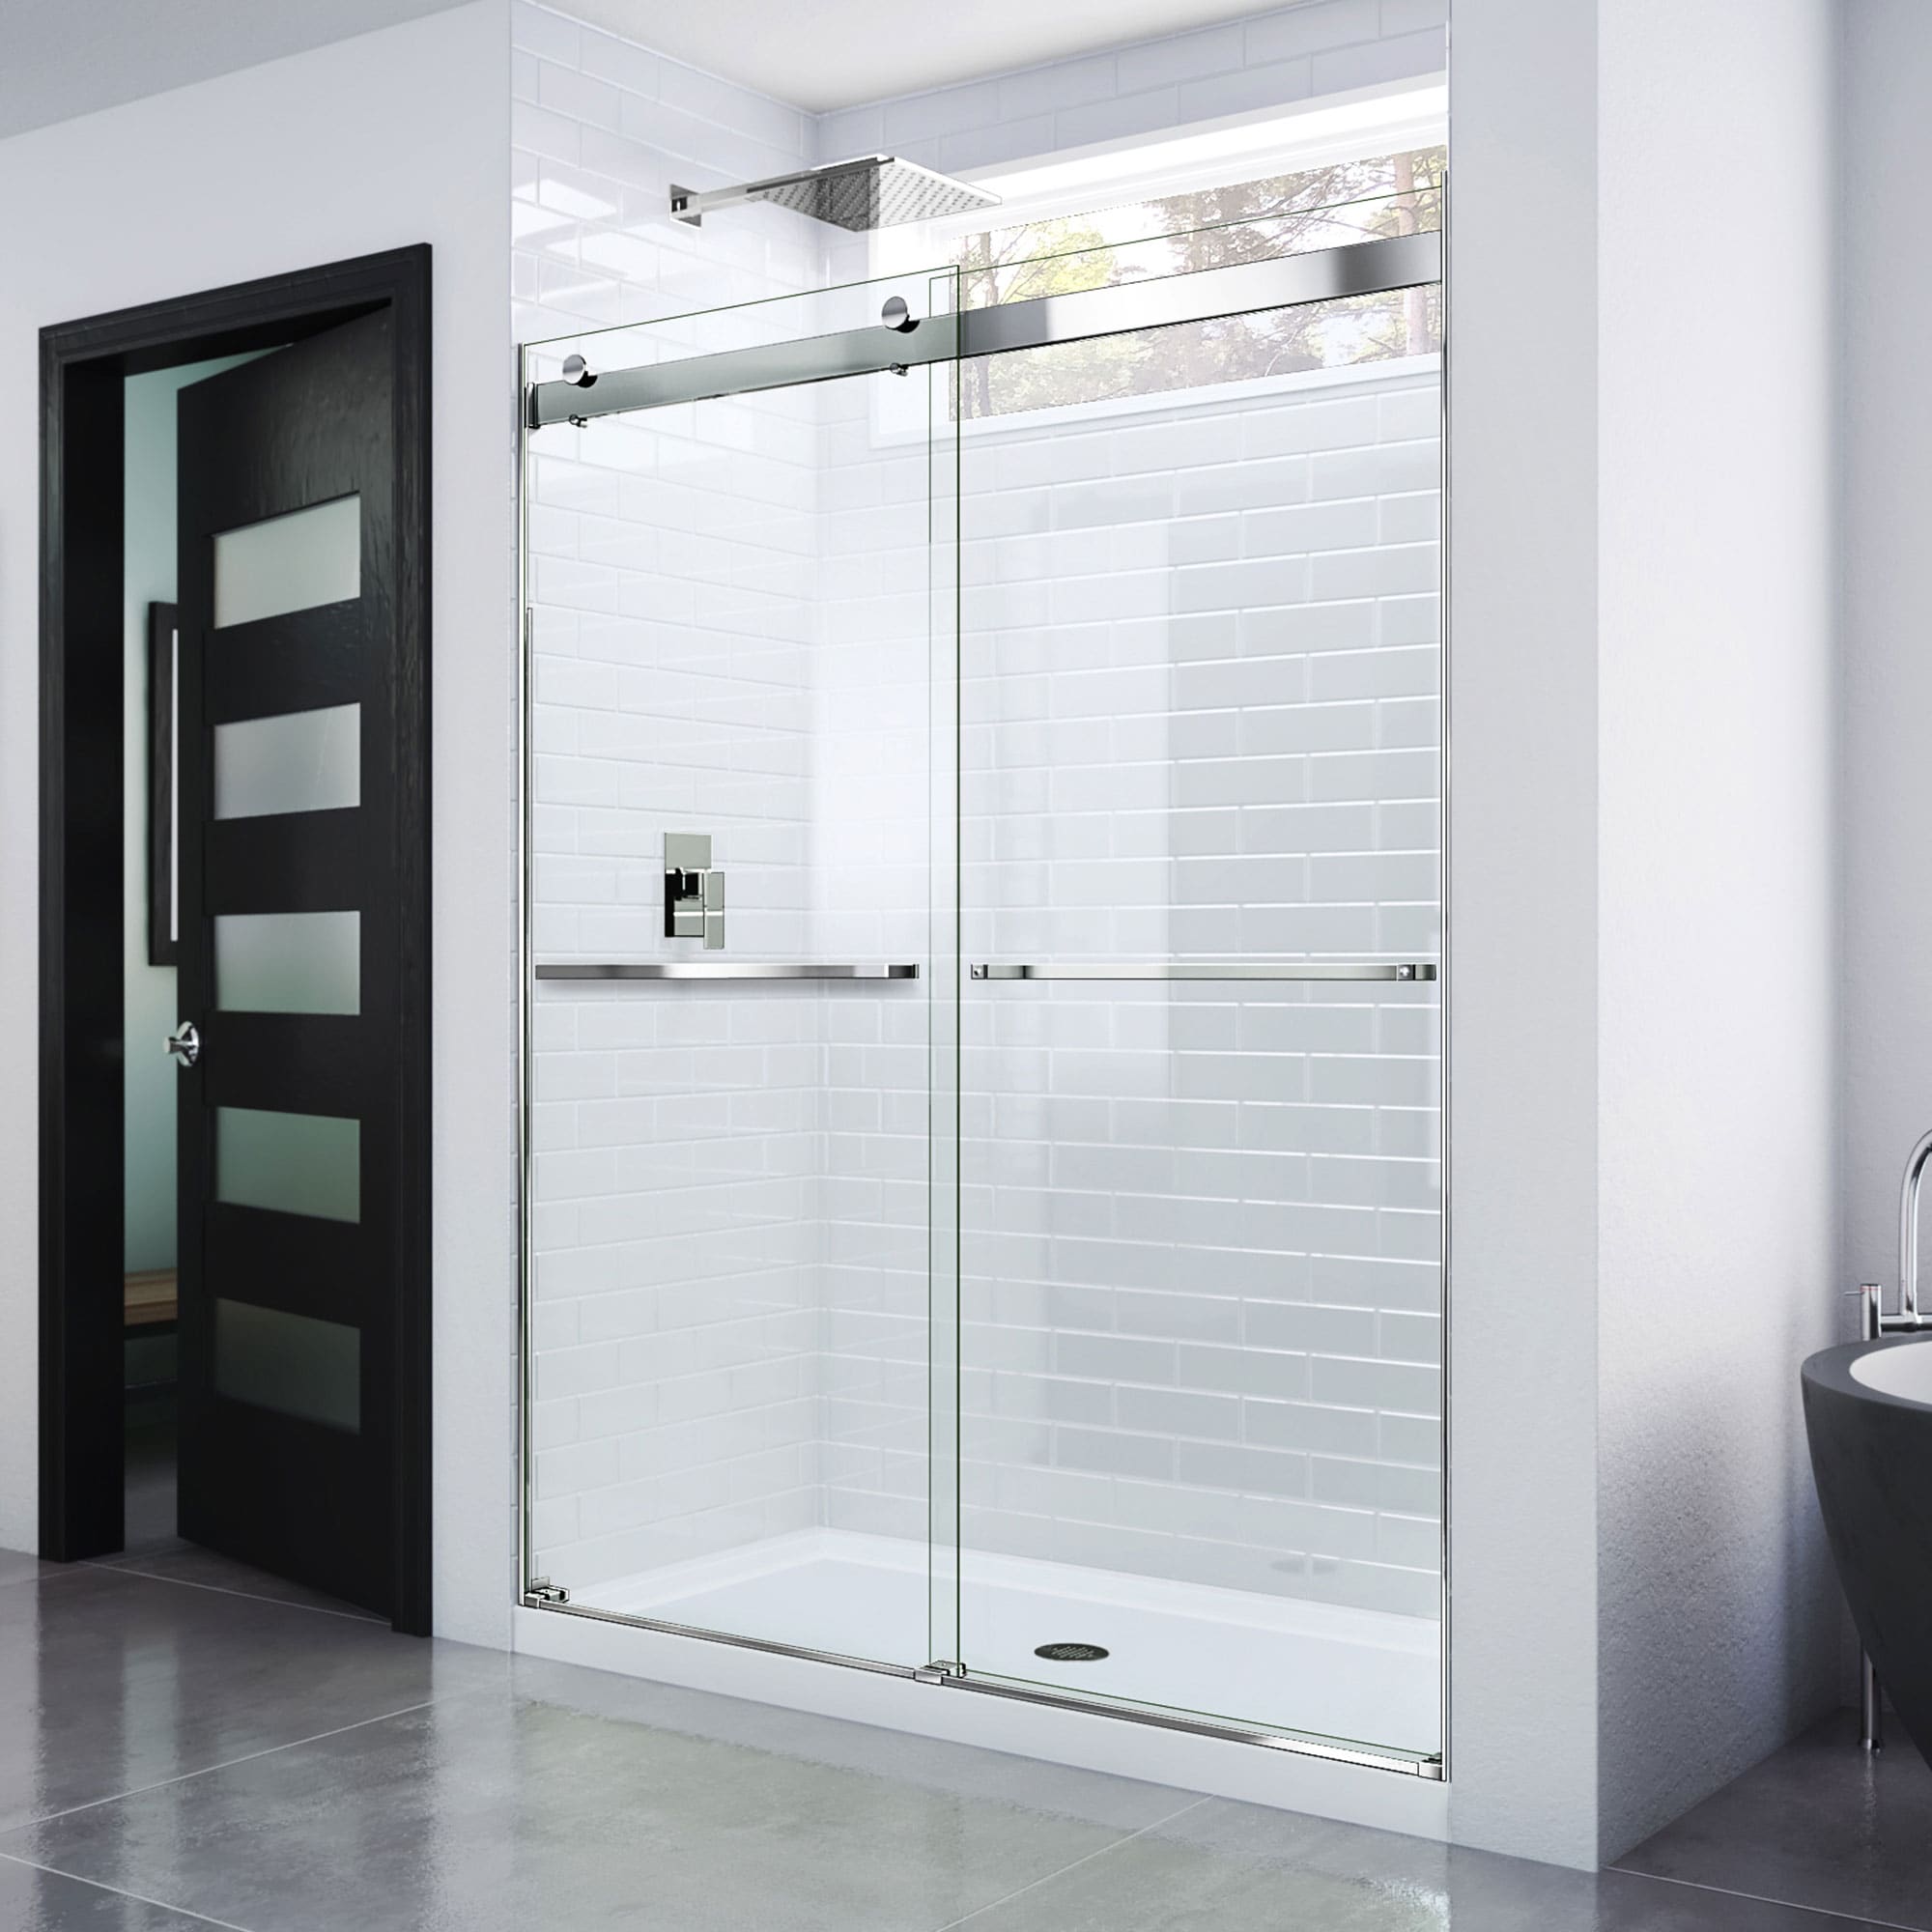 How To Clean The Shower Door Less Using Rain-X